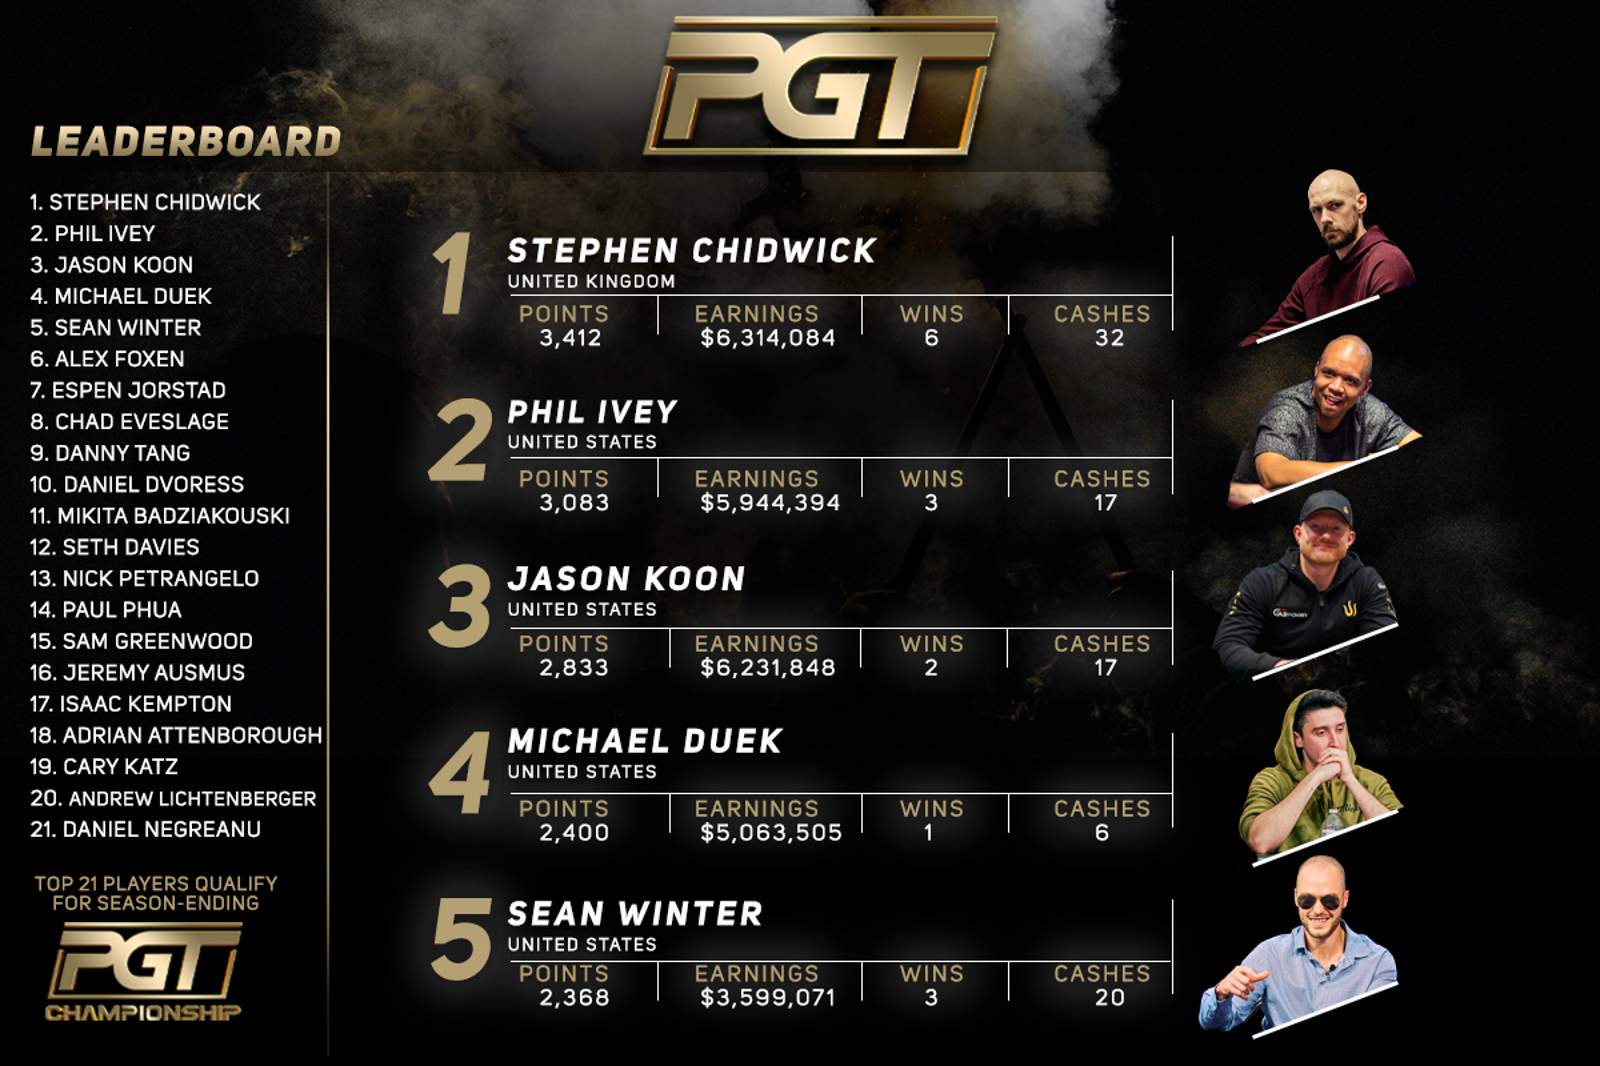 Who Will Make the PGT Leaderboard Top 21?